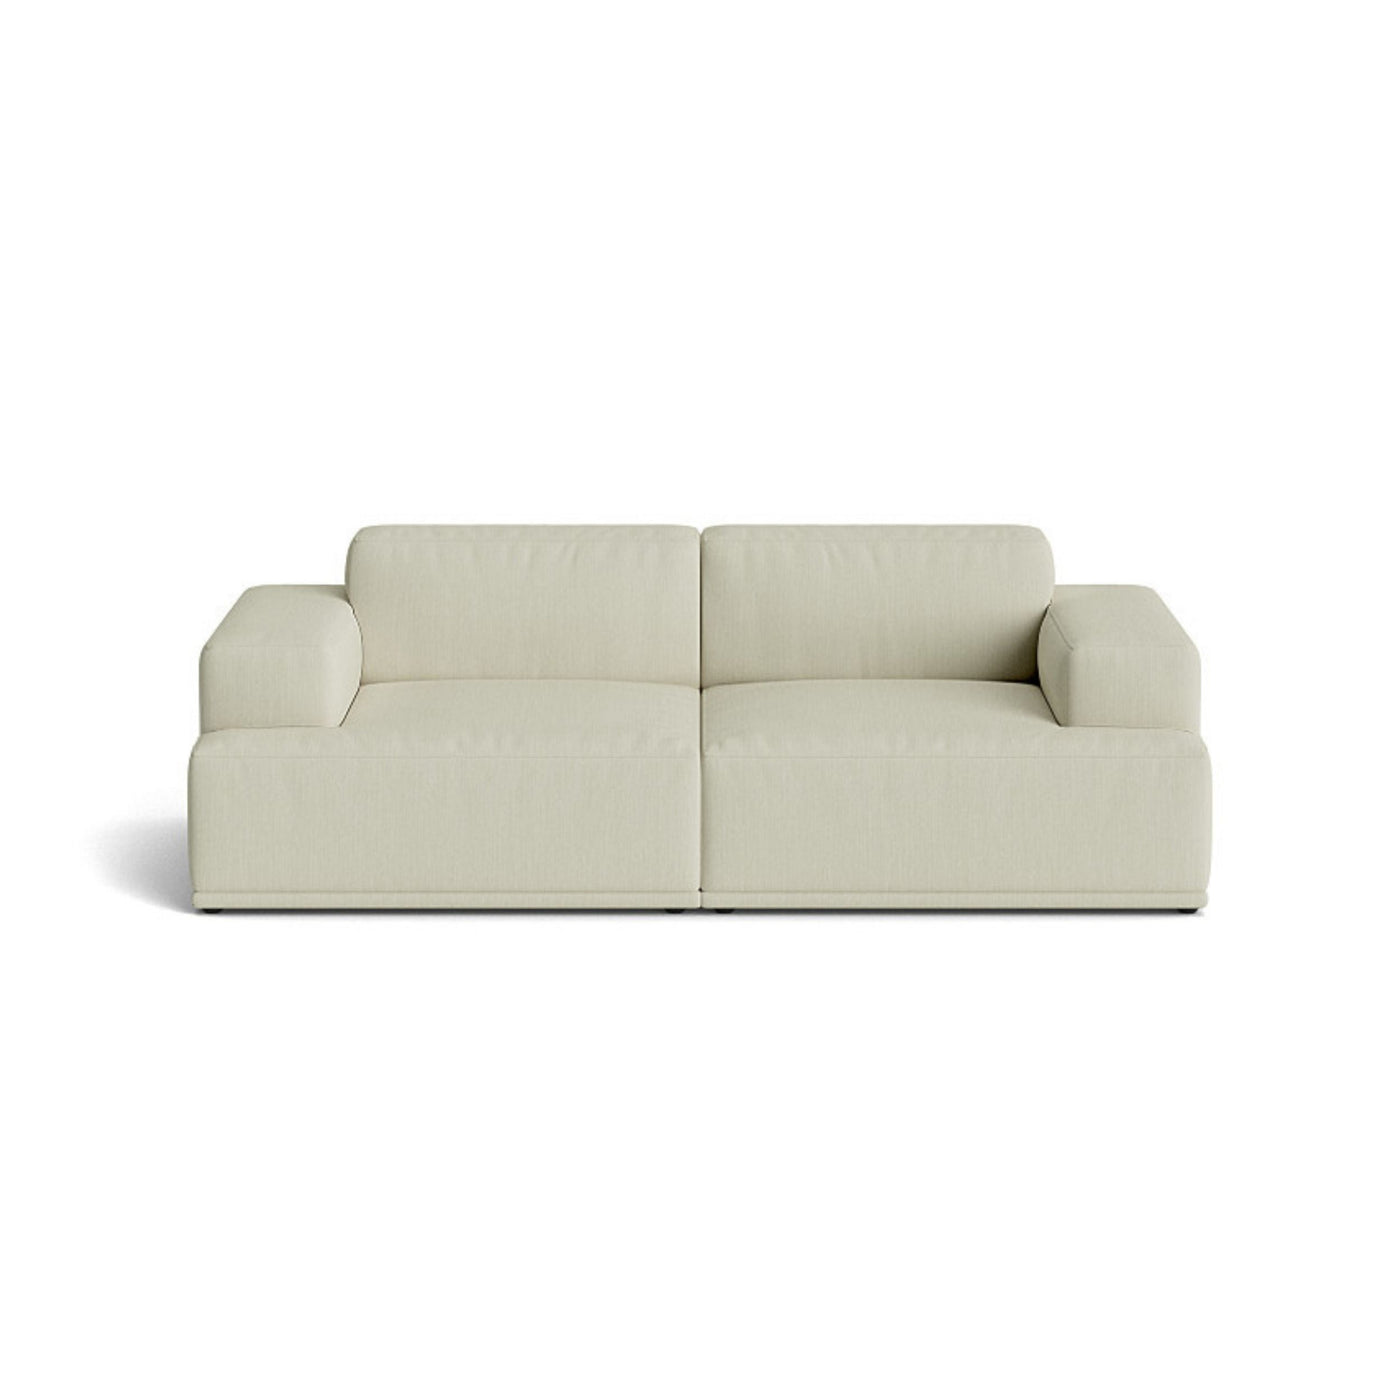 Muuto Connect Soft Modular 2 Seater Sofa, configuration 1. made-to-order from someday designs. #colour_balder-912